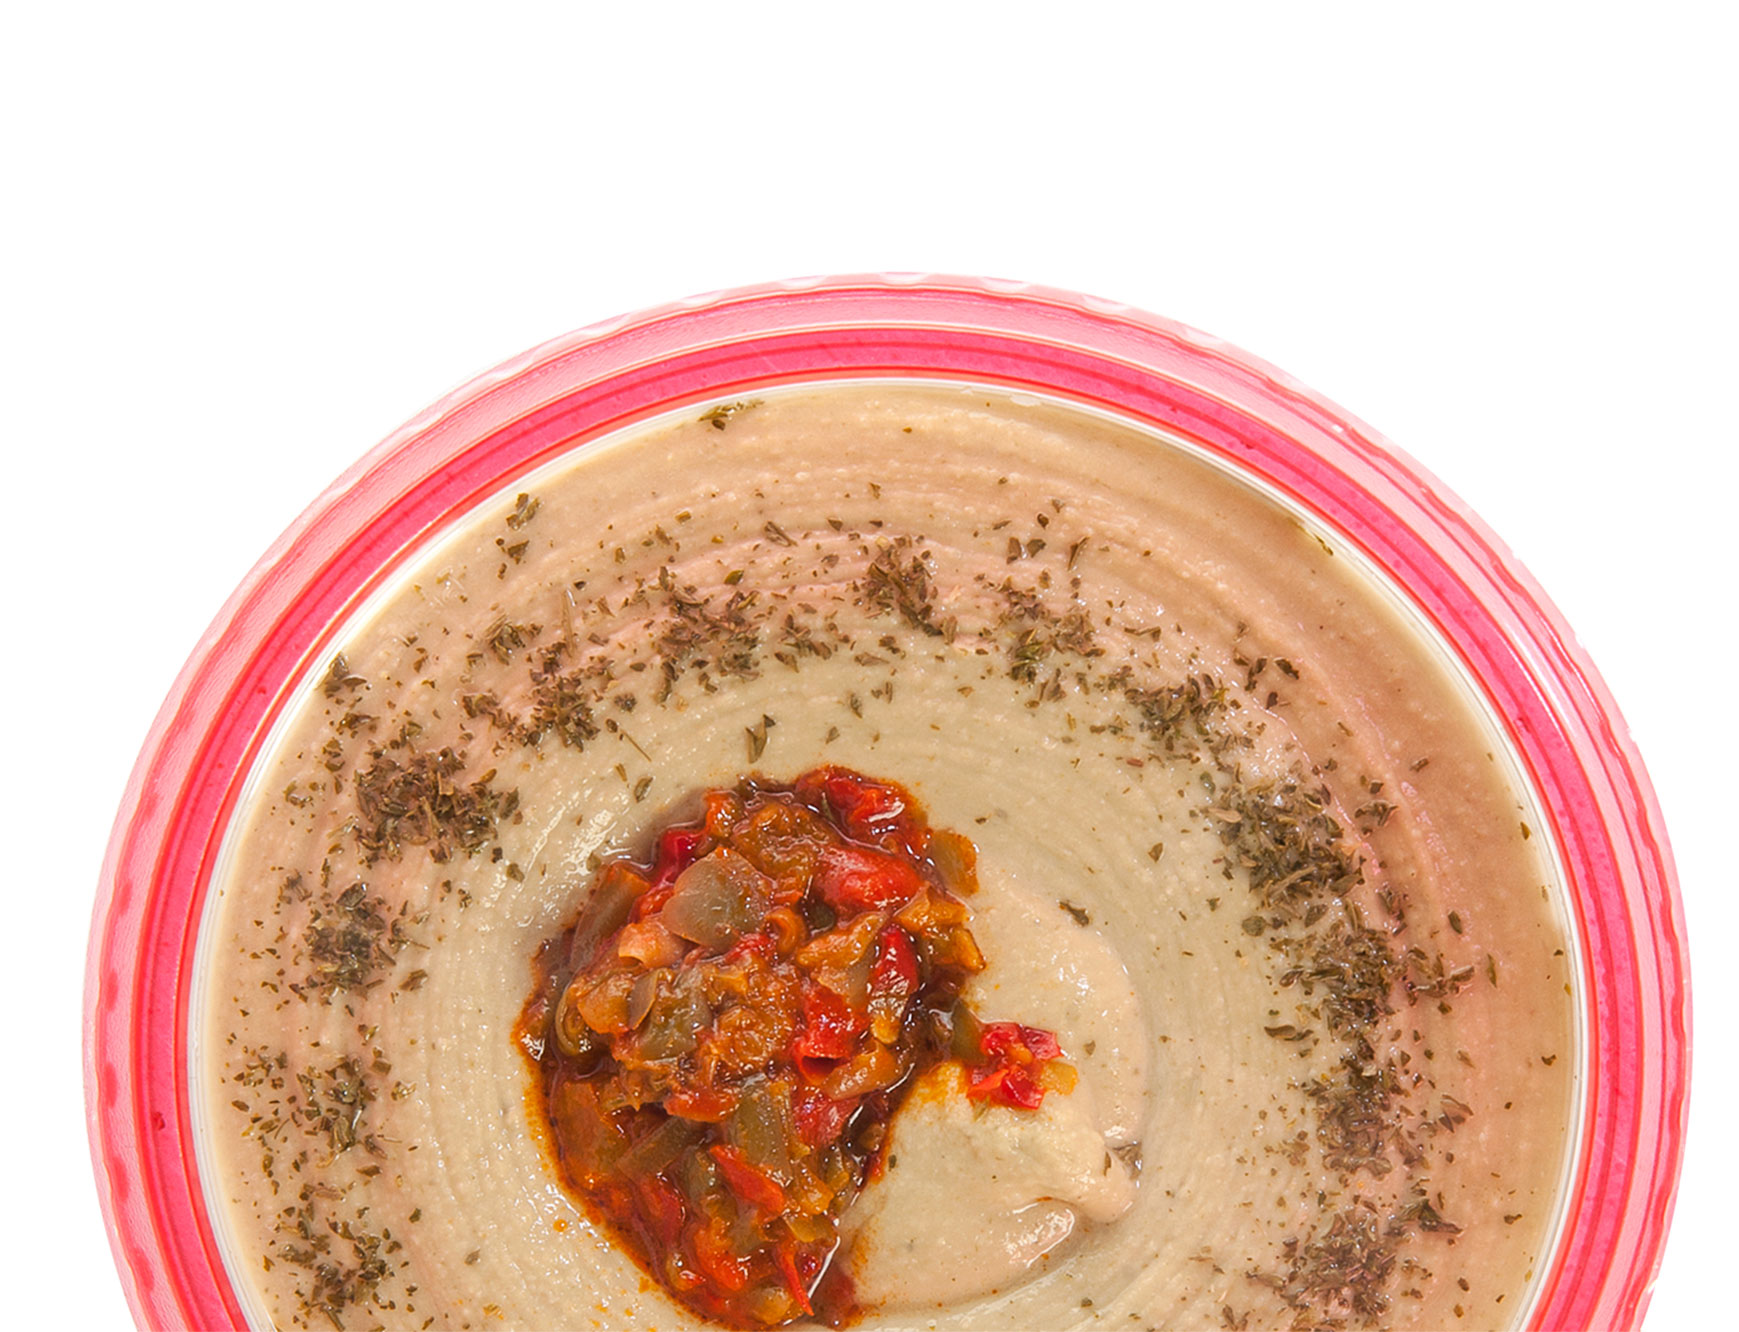 thermoformed plastic HPP container with hummus with sauteed vegetabled and spice on top